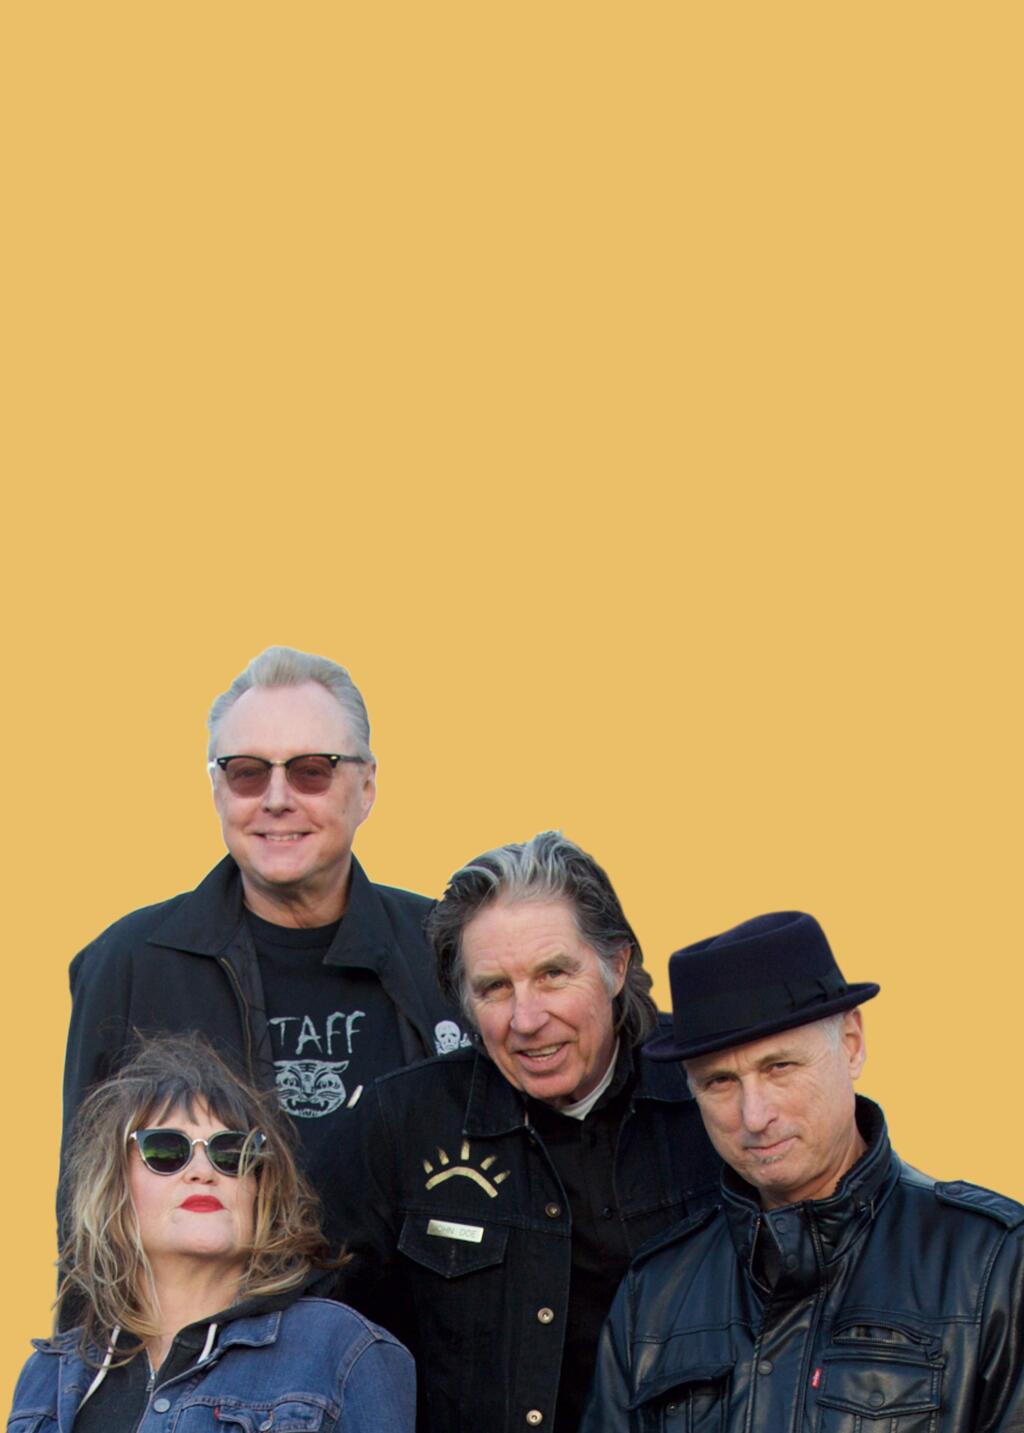 American rock band X, formed in Los Angeles in 1977,was among the first wave of punk. The original members are vocalist Exene Cervenka, vocalist/bassist John Doe, guitarist Billy Zoom and drummer D.J. Bonebrake. (GARY LEONARD)